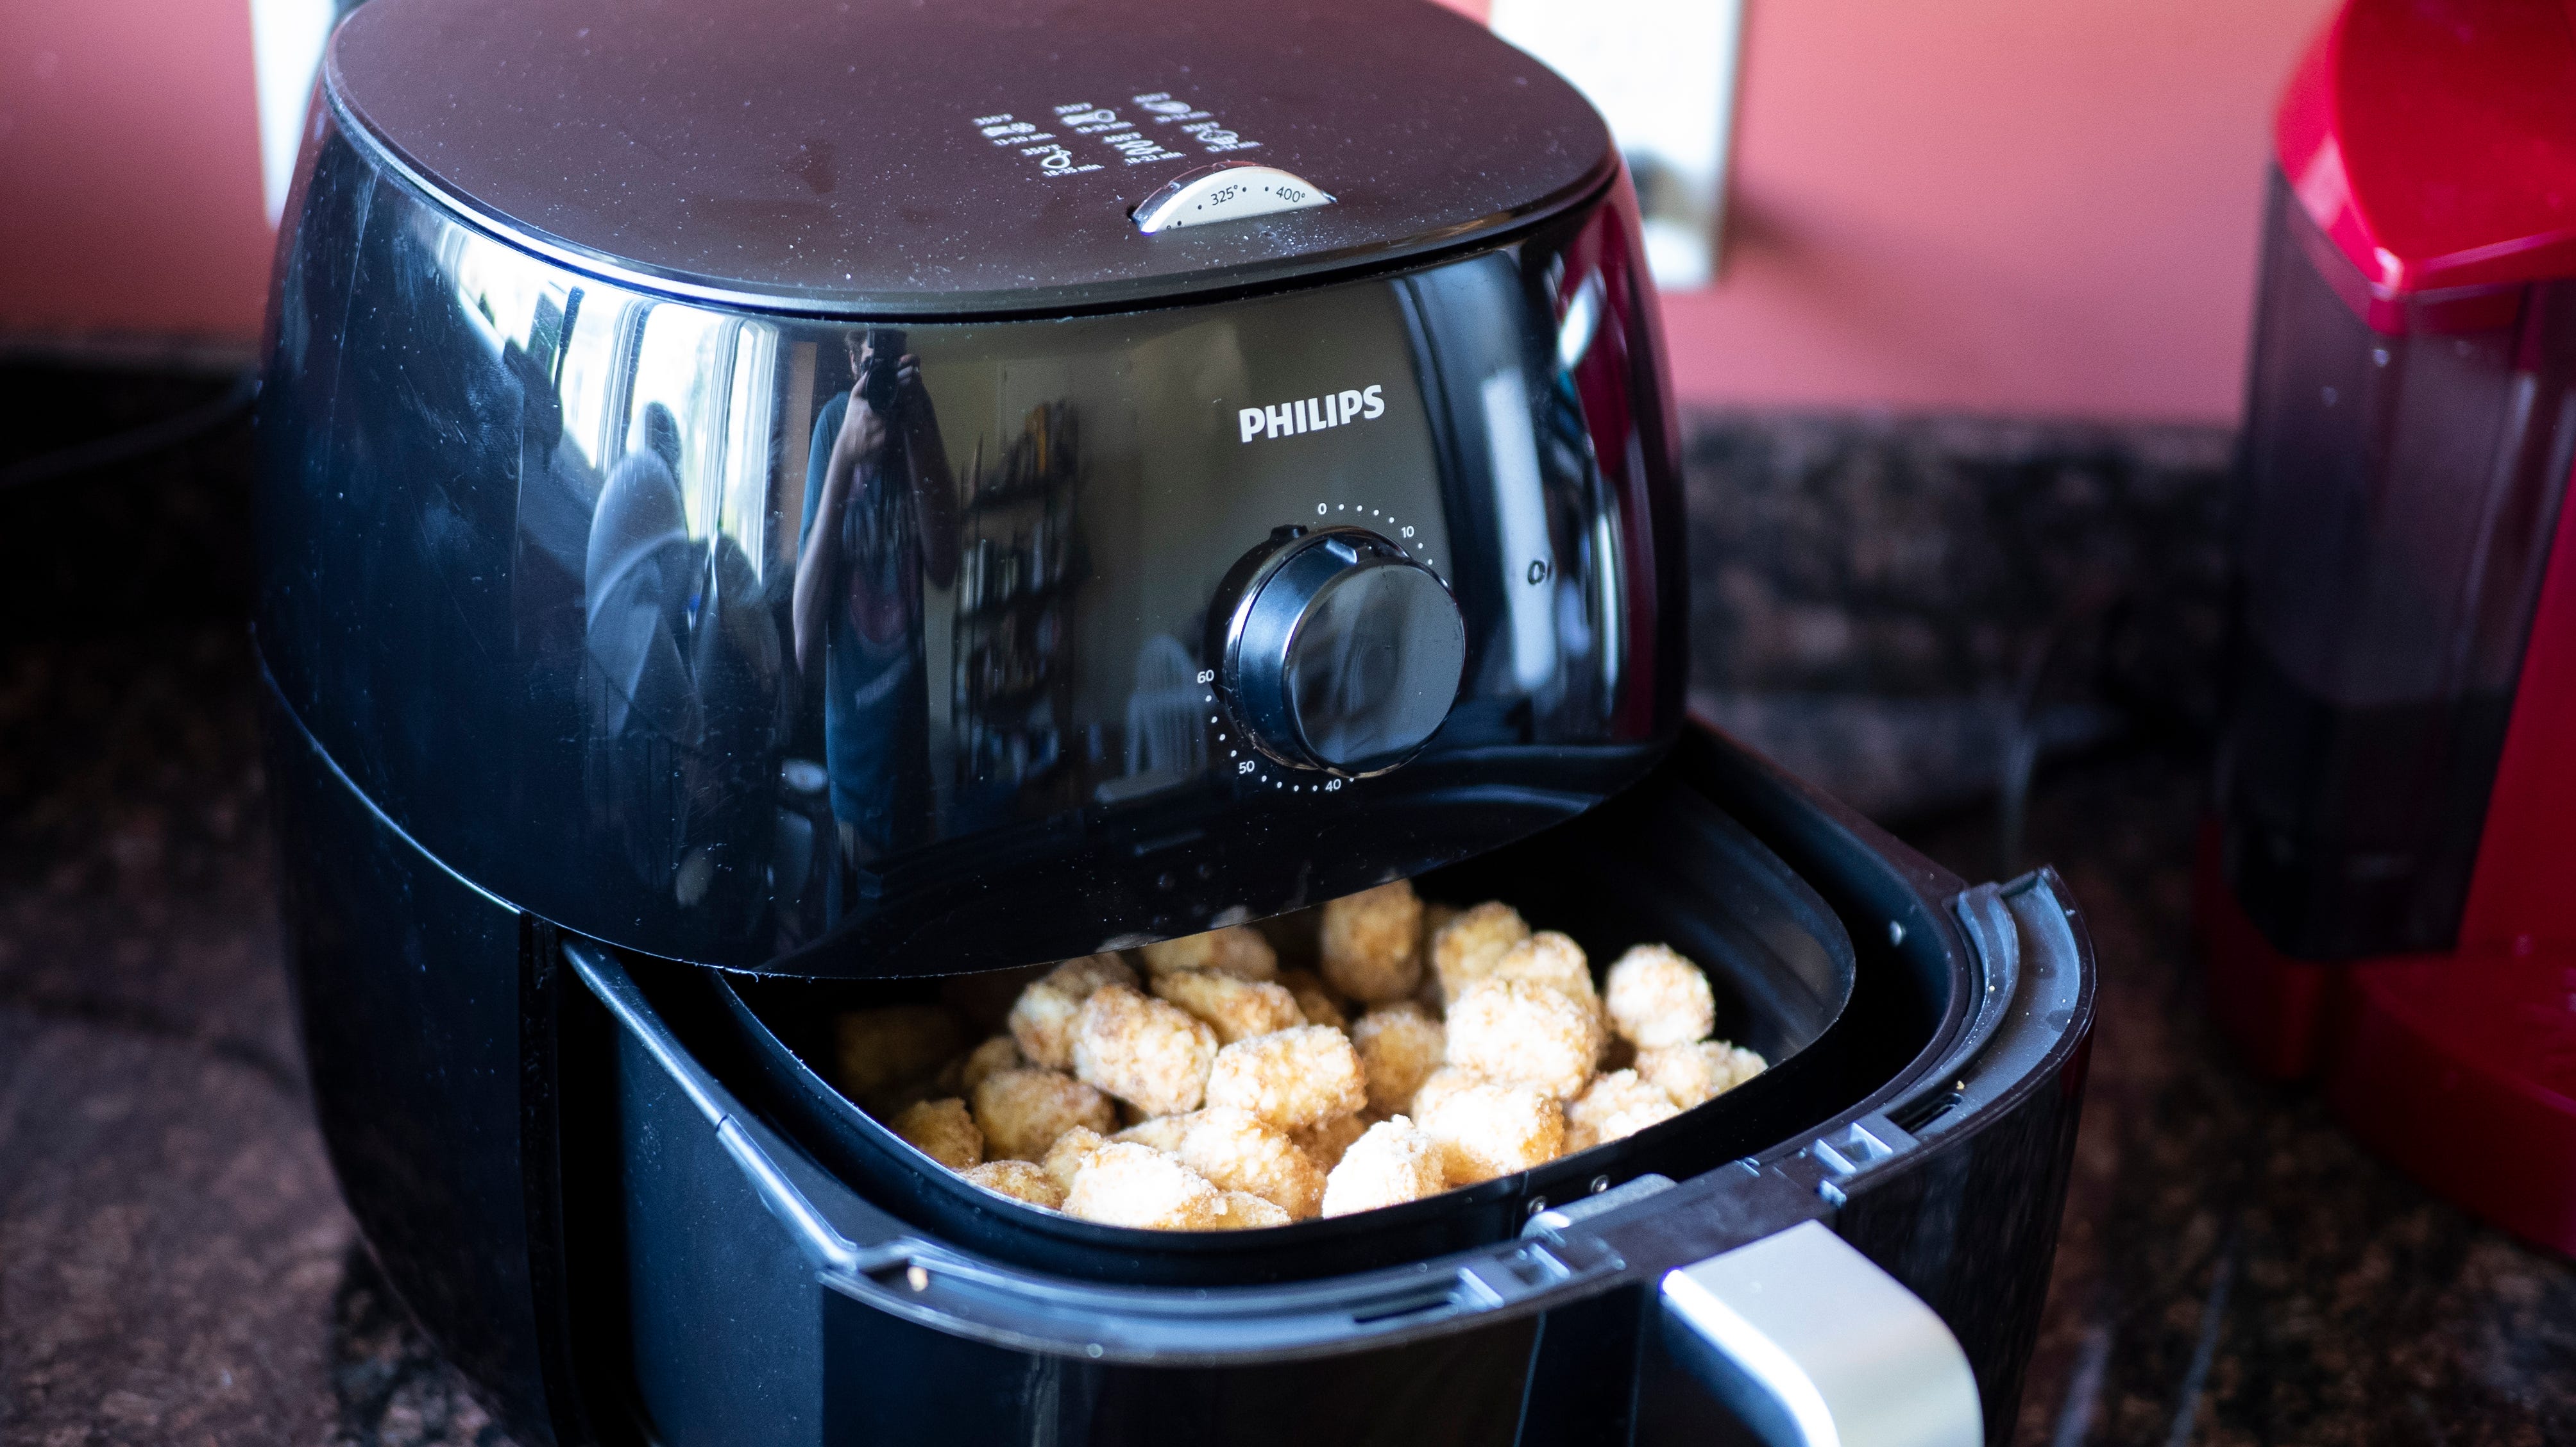 Early Black Friday deal: Our favorite air fryer down to all-time price